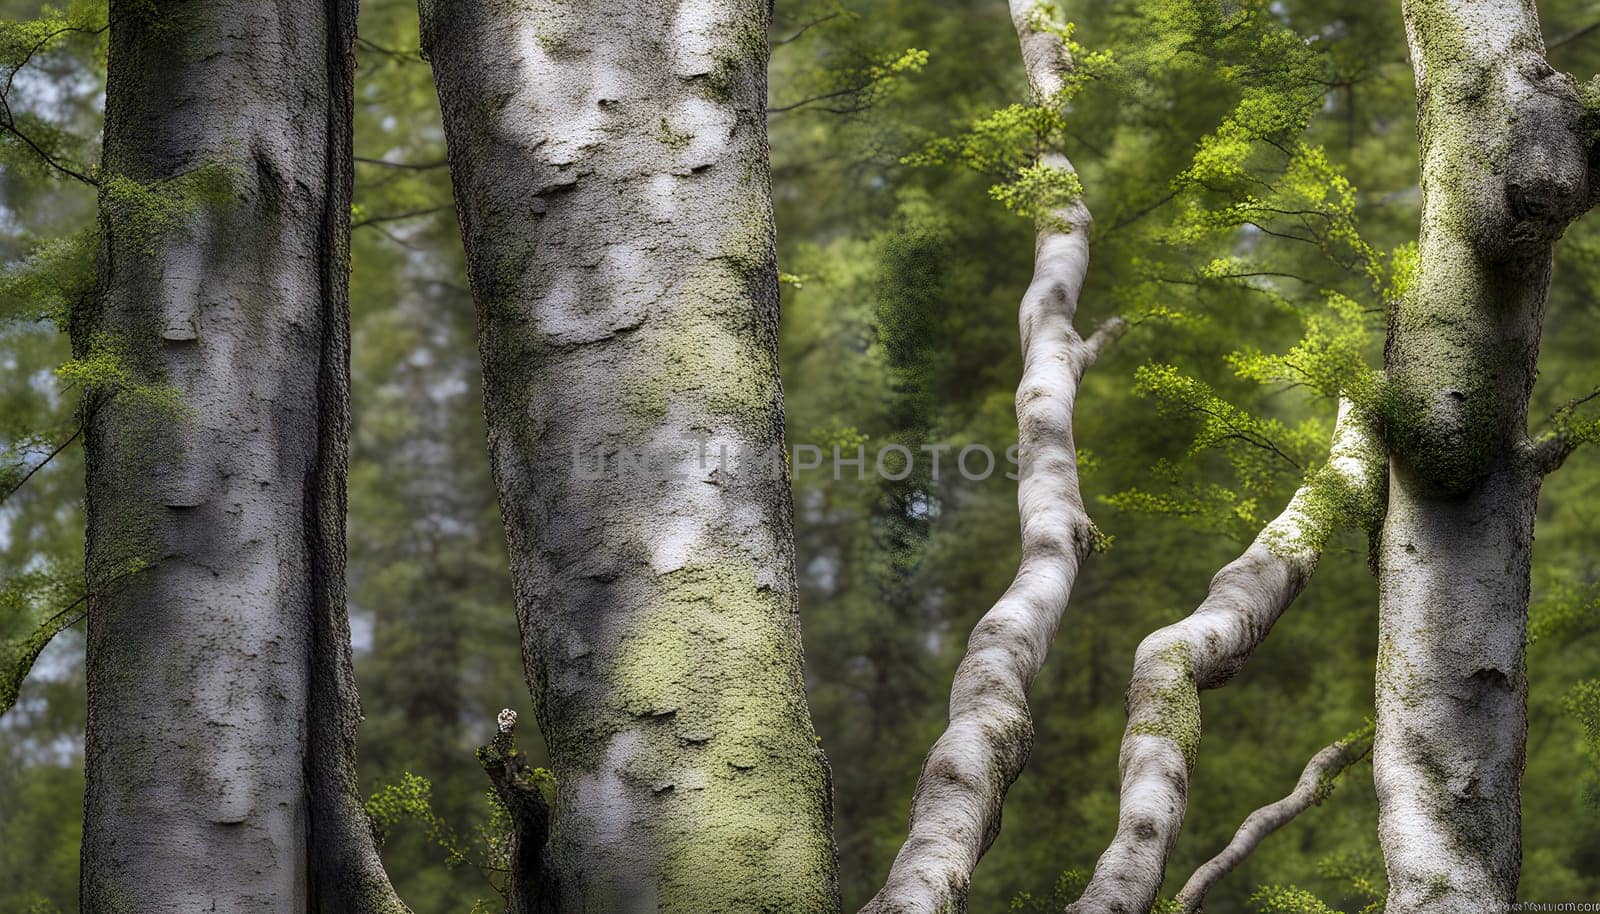 Twisted Trees with Lichen in a Lush Forest by rostik924